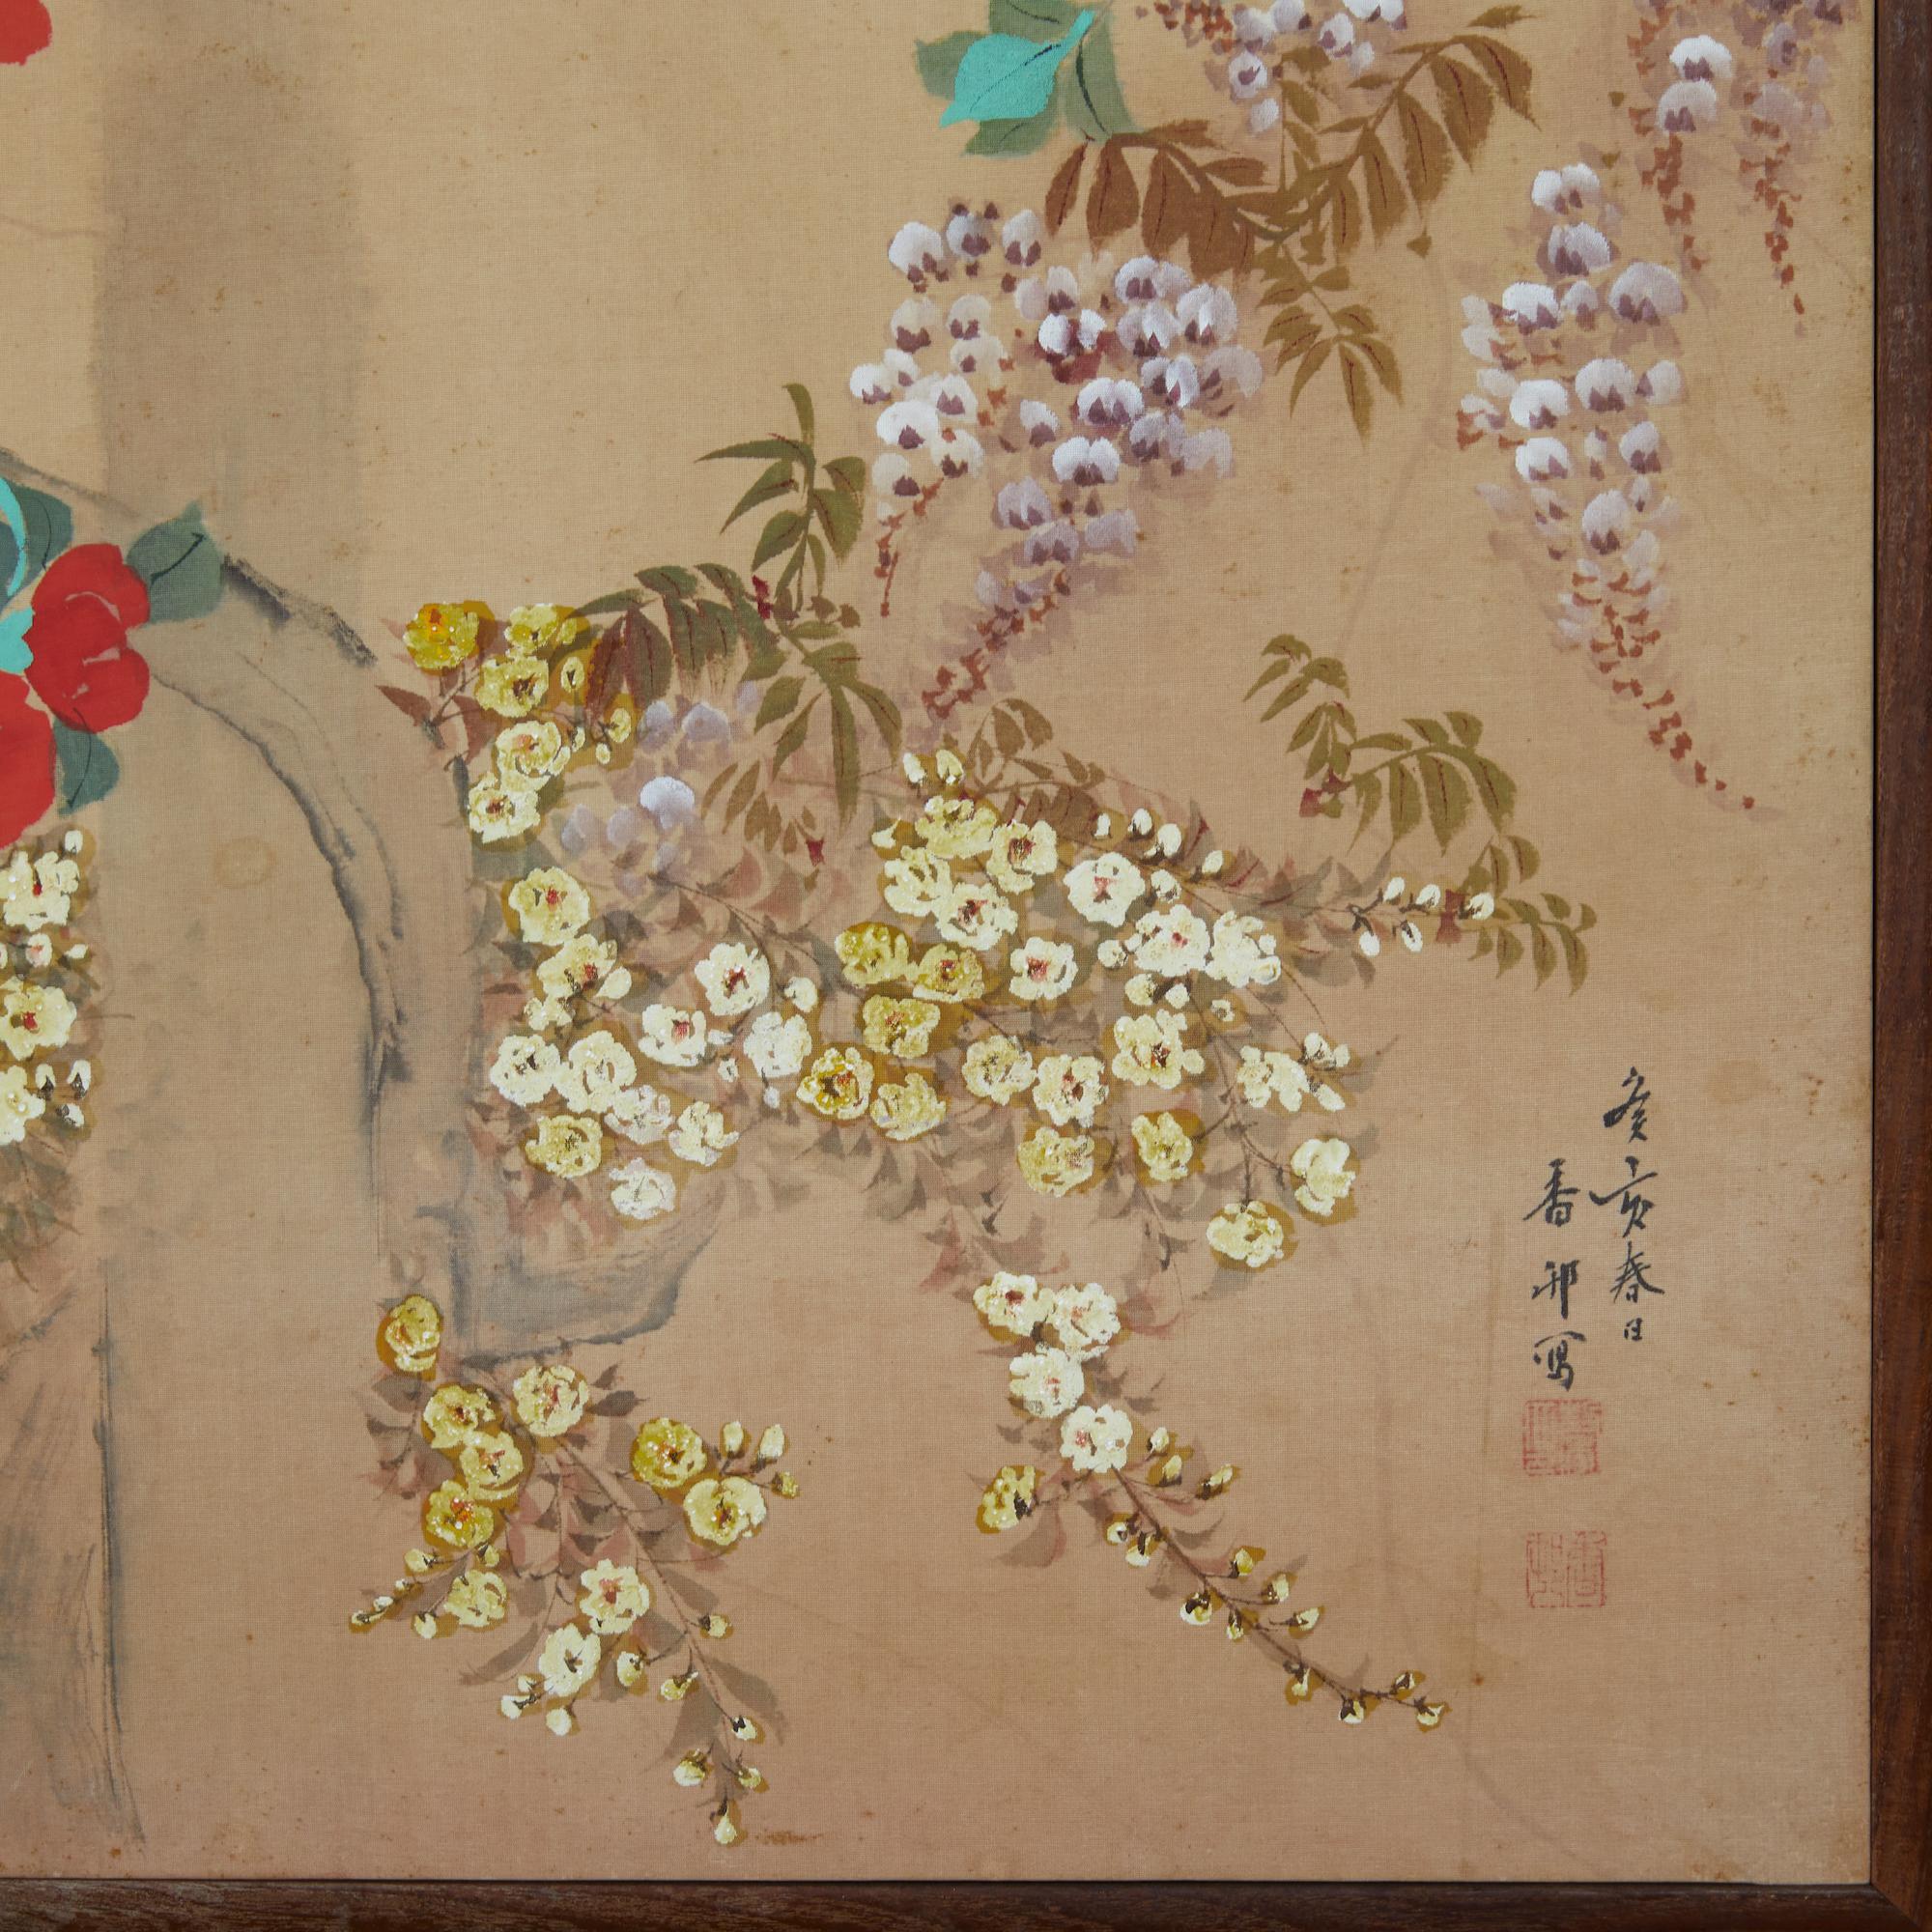 Wisteria represents sentiments of love and longevity as vibrant floral colors dance dramatically amongst the two panels.  Mineral pigments on Mulberry paper with a natural wood trim. Signature reads: Koho Ga, Mizinoto i (zodiac year)  1912.   